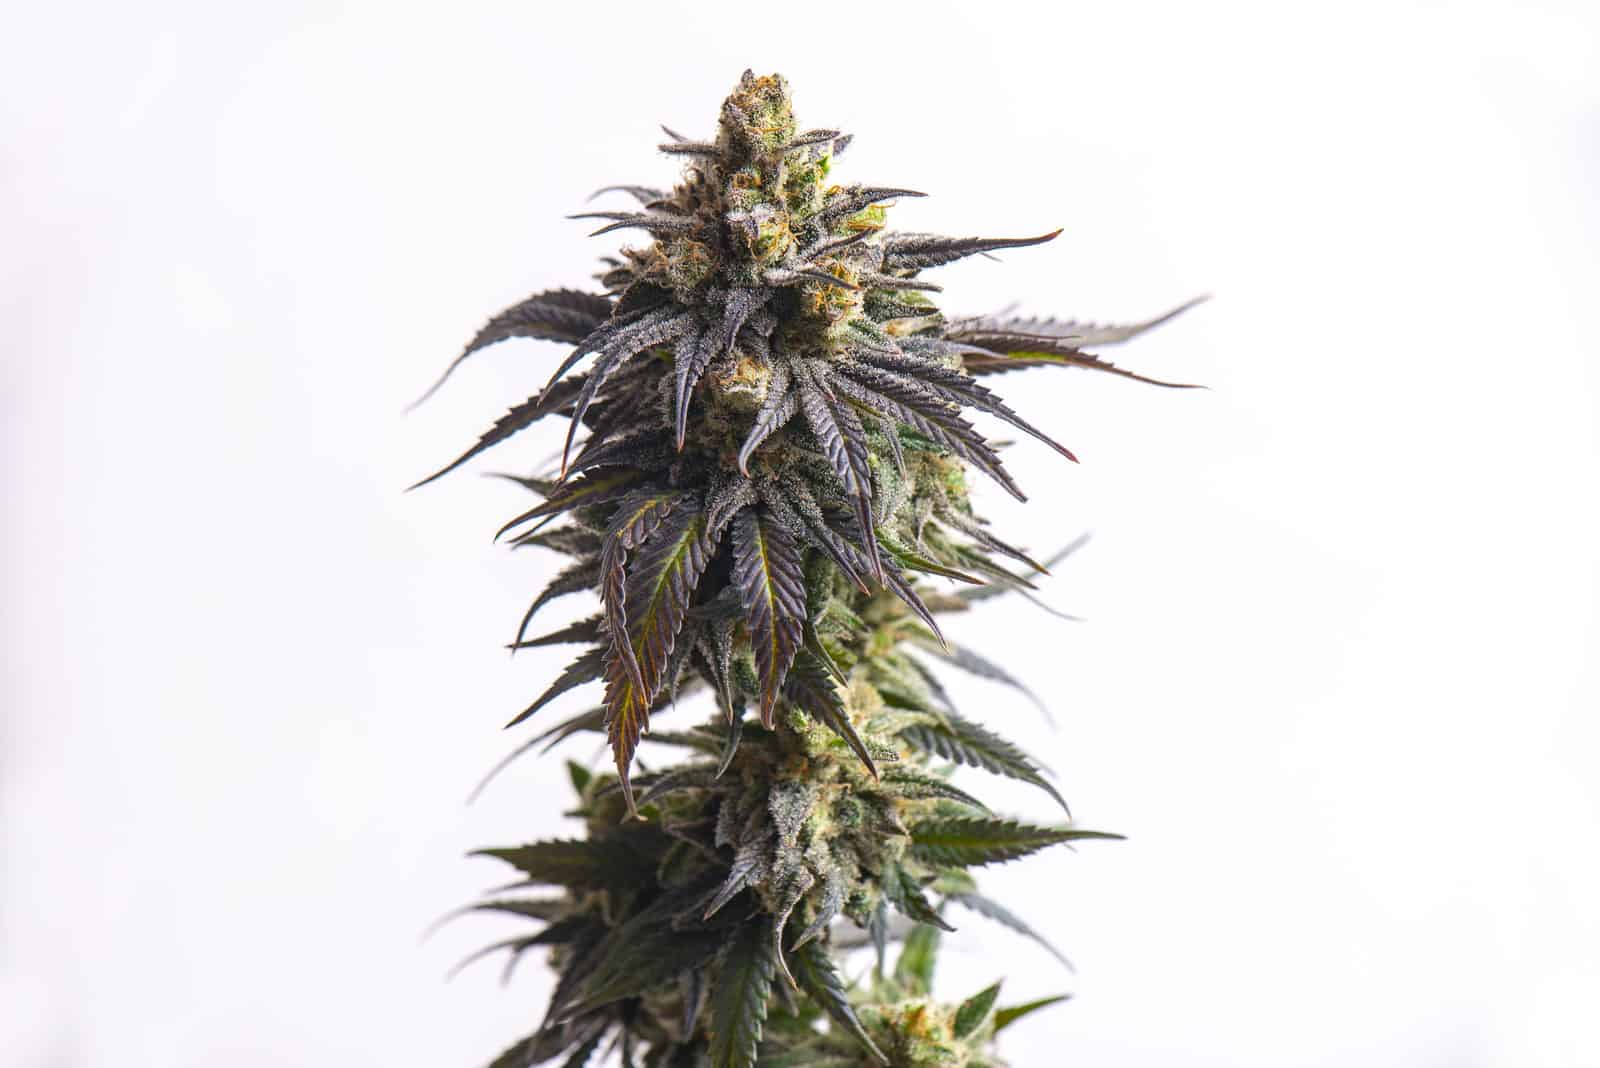 Wedding Cake Weed Strain Review & Information